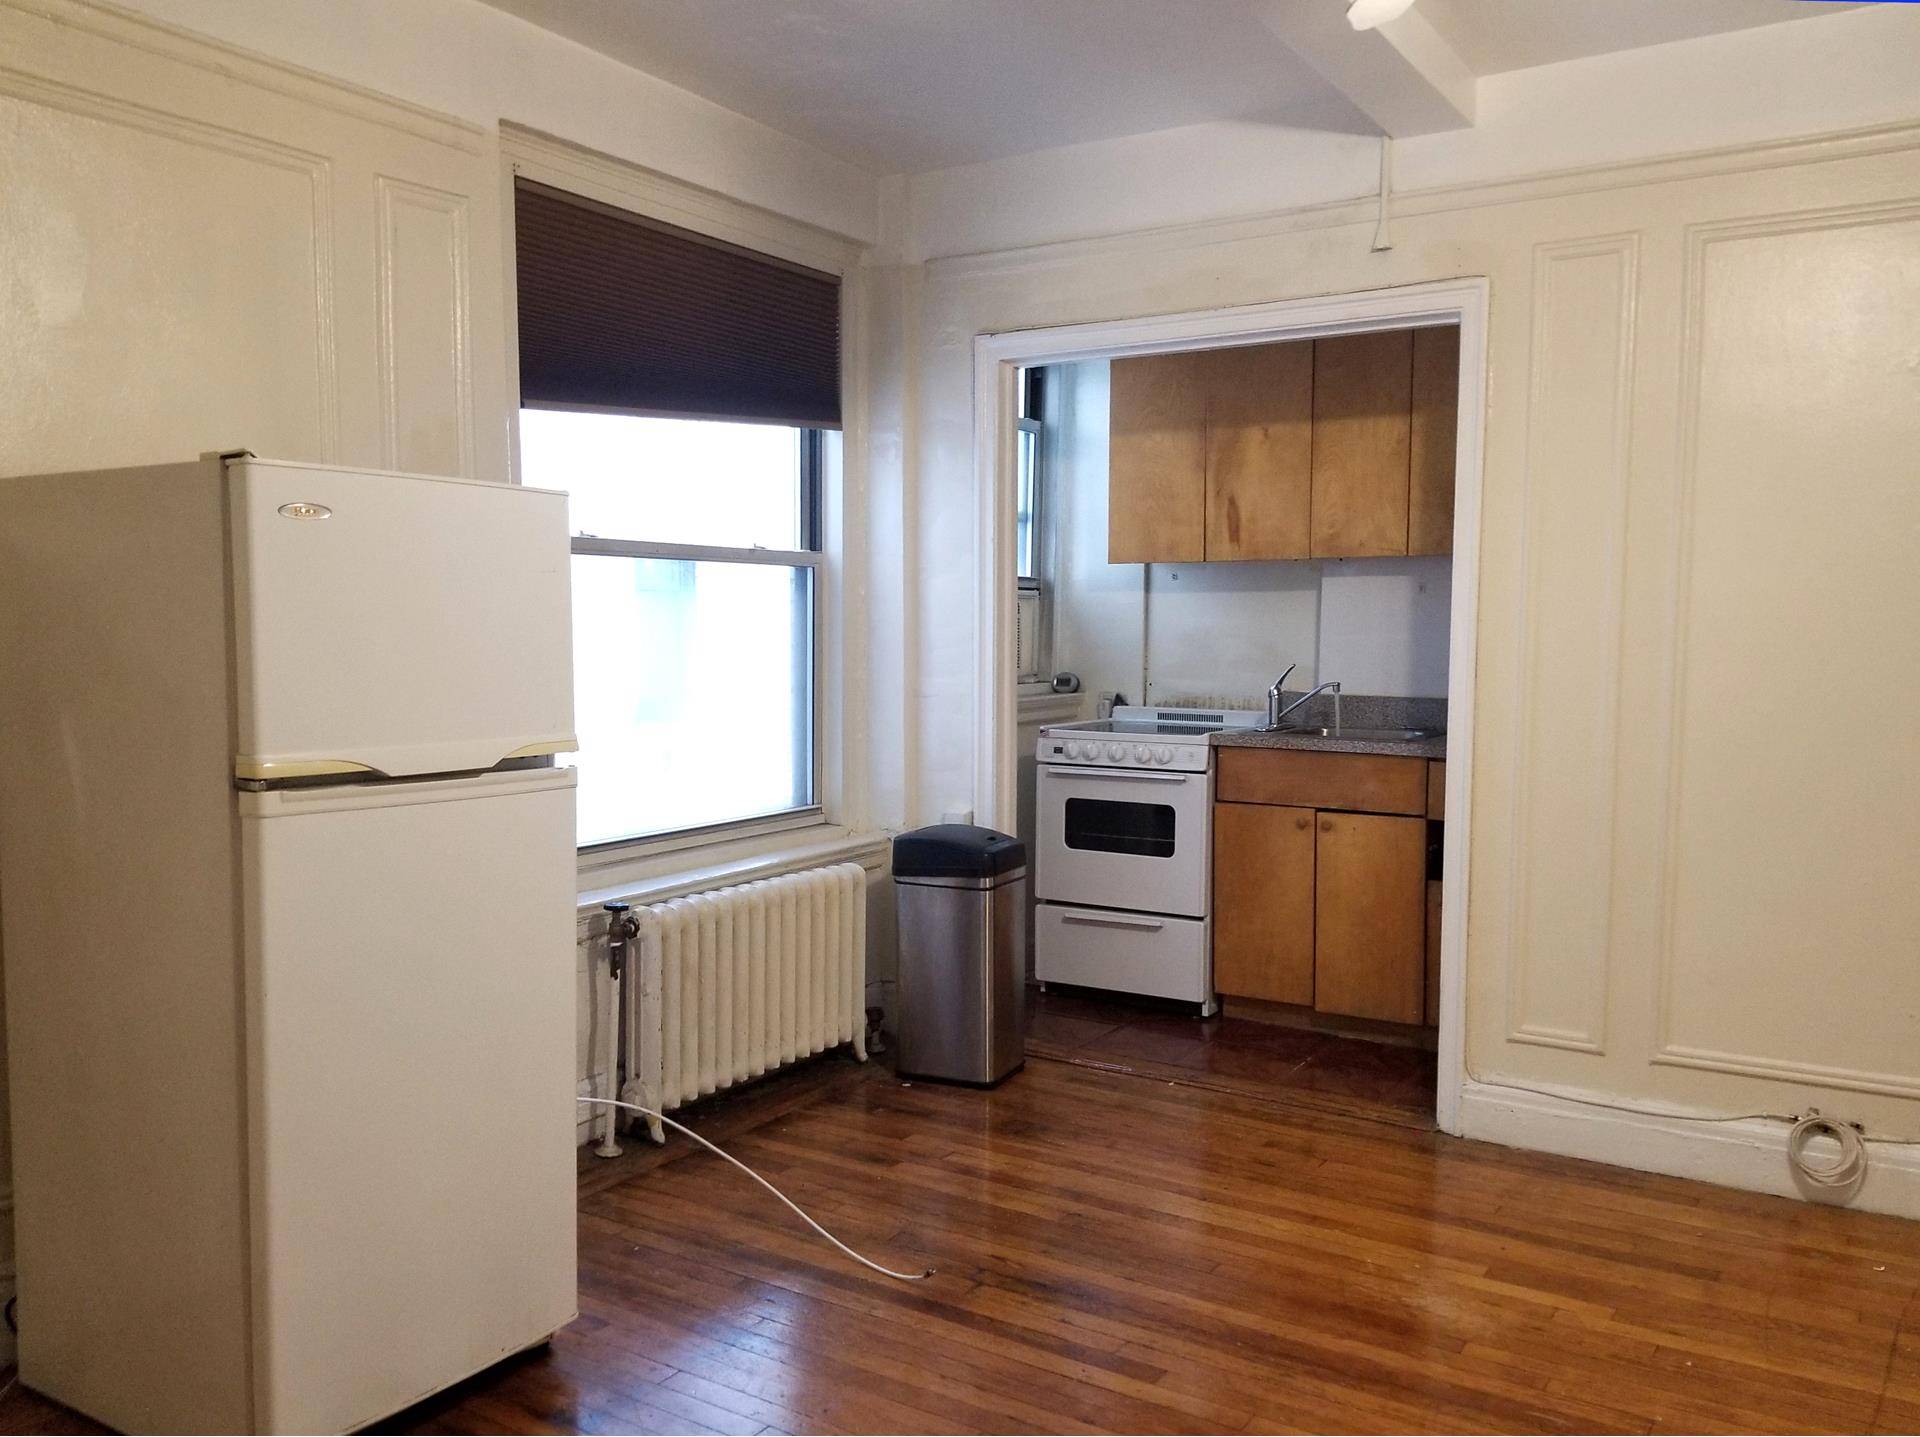 No brokers fee and no board approval on this spacious 2 bedroom 1 bath apartment with 4 closets.